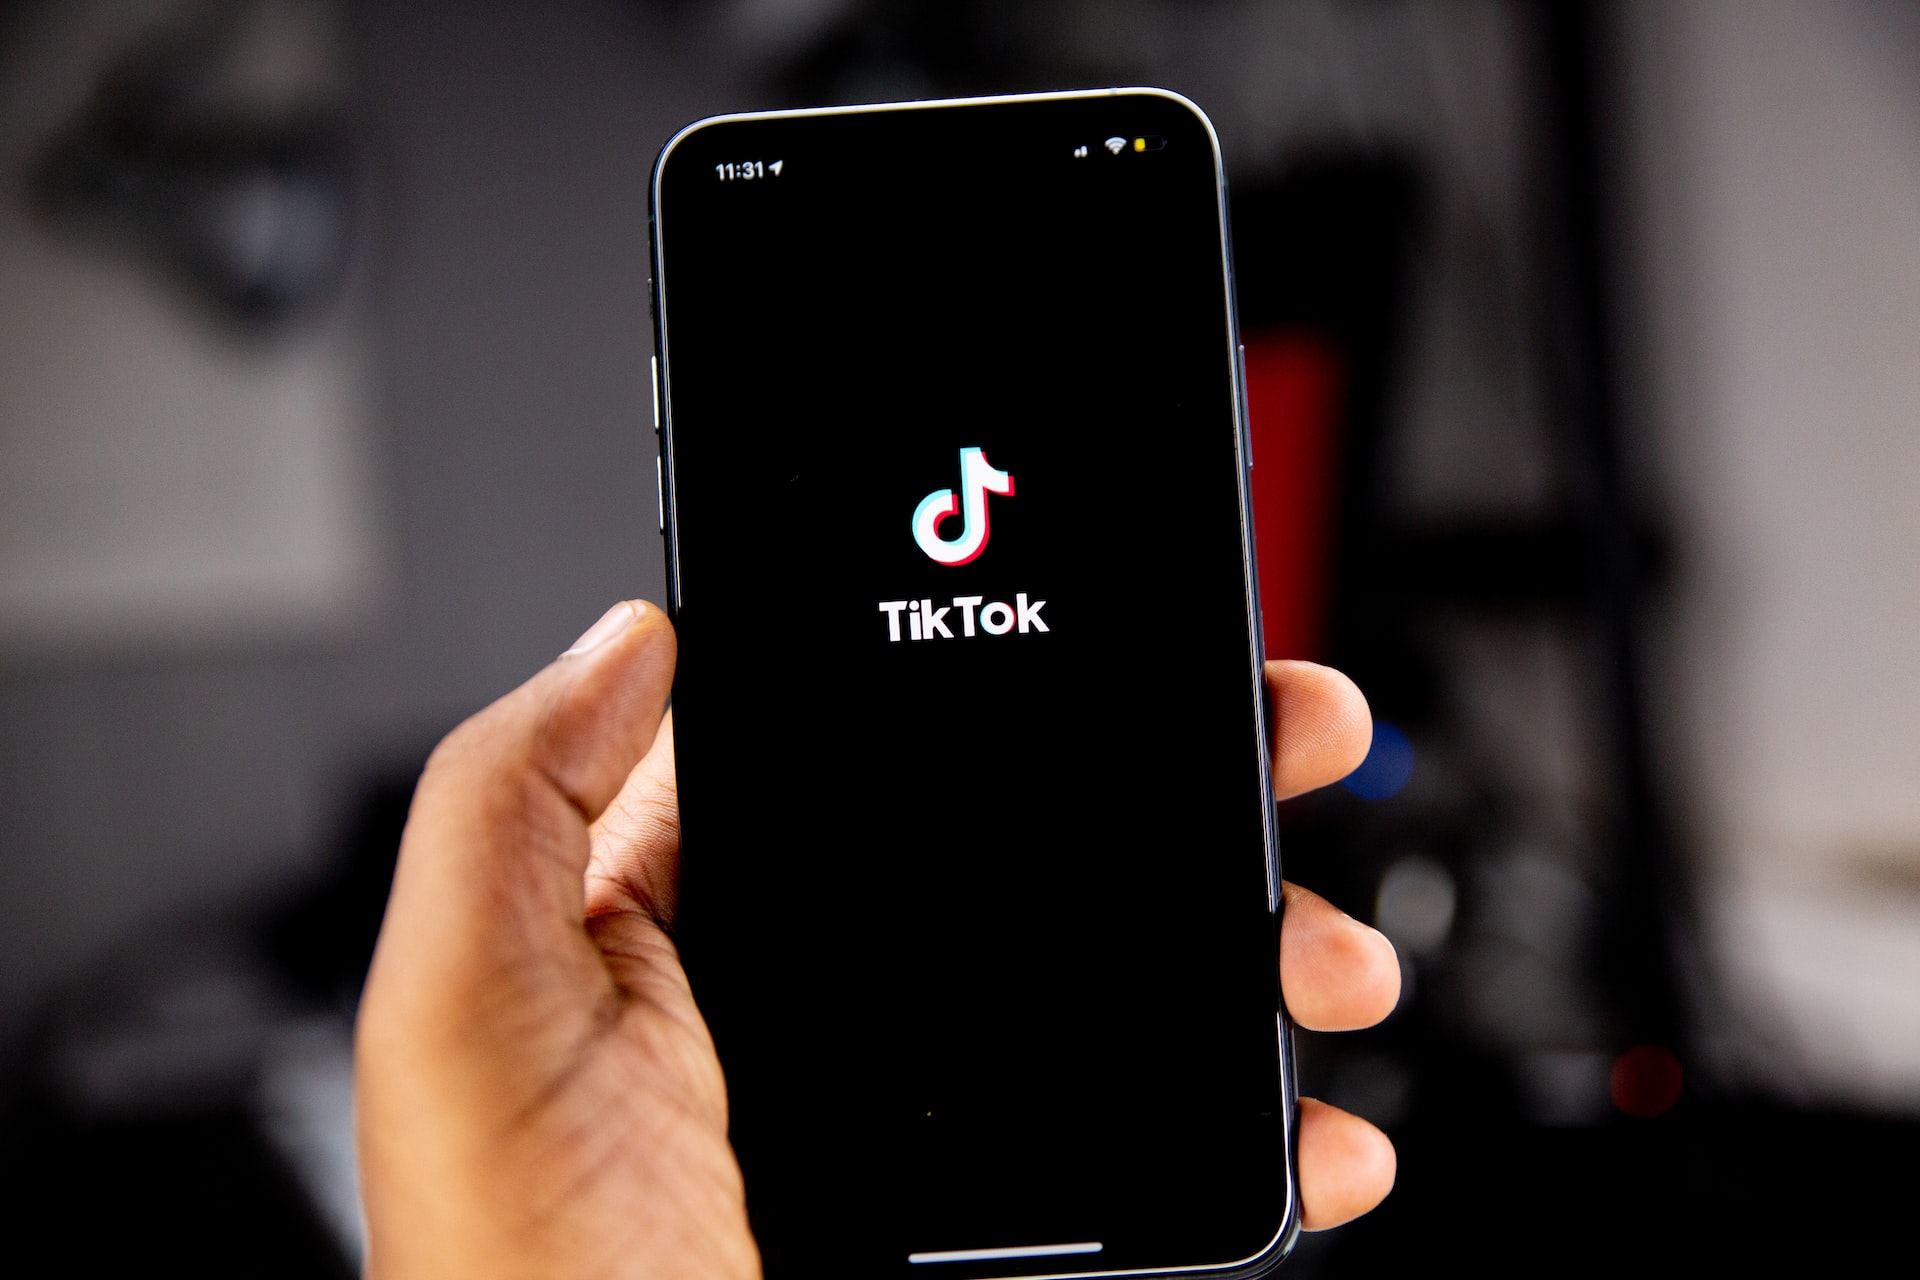 TikTok has become a global giant. The US is threatening to rein it in